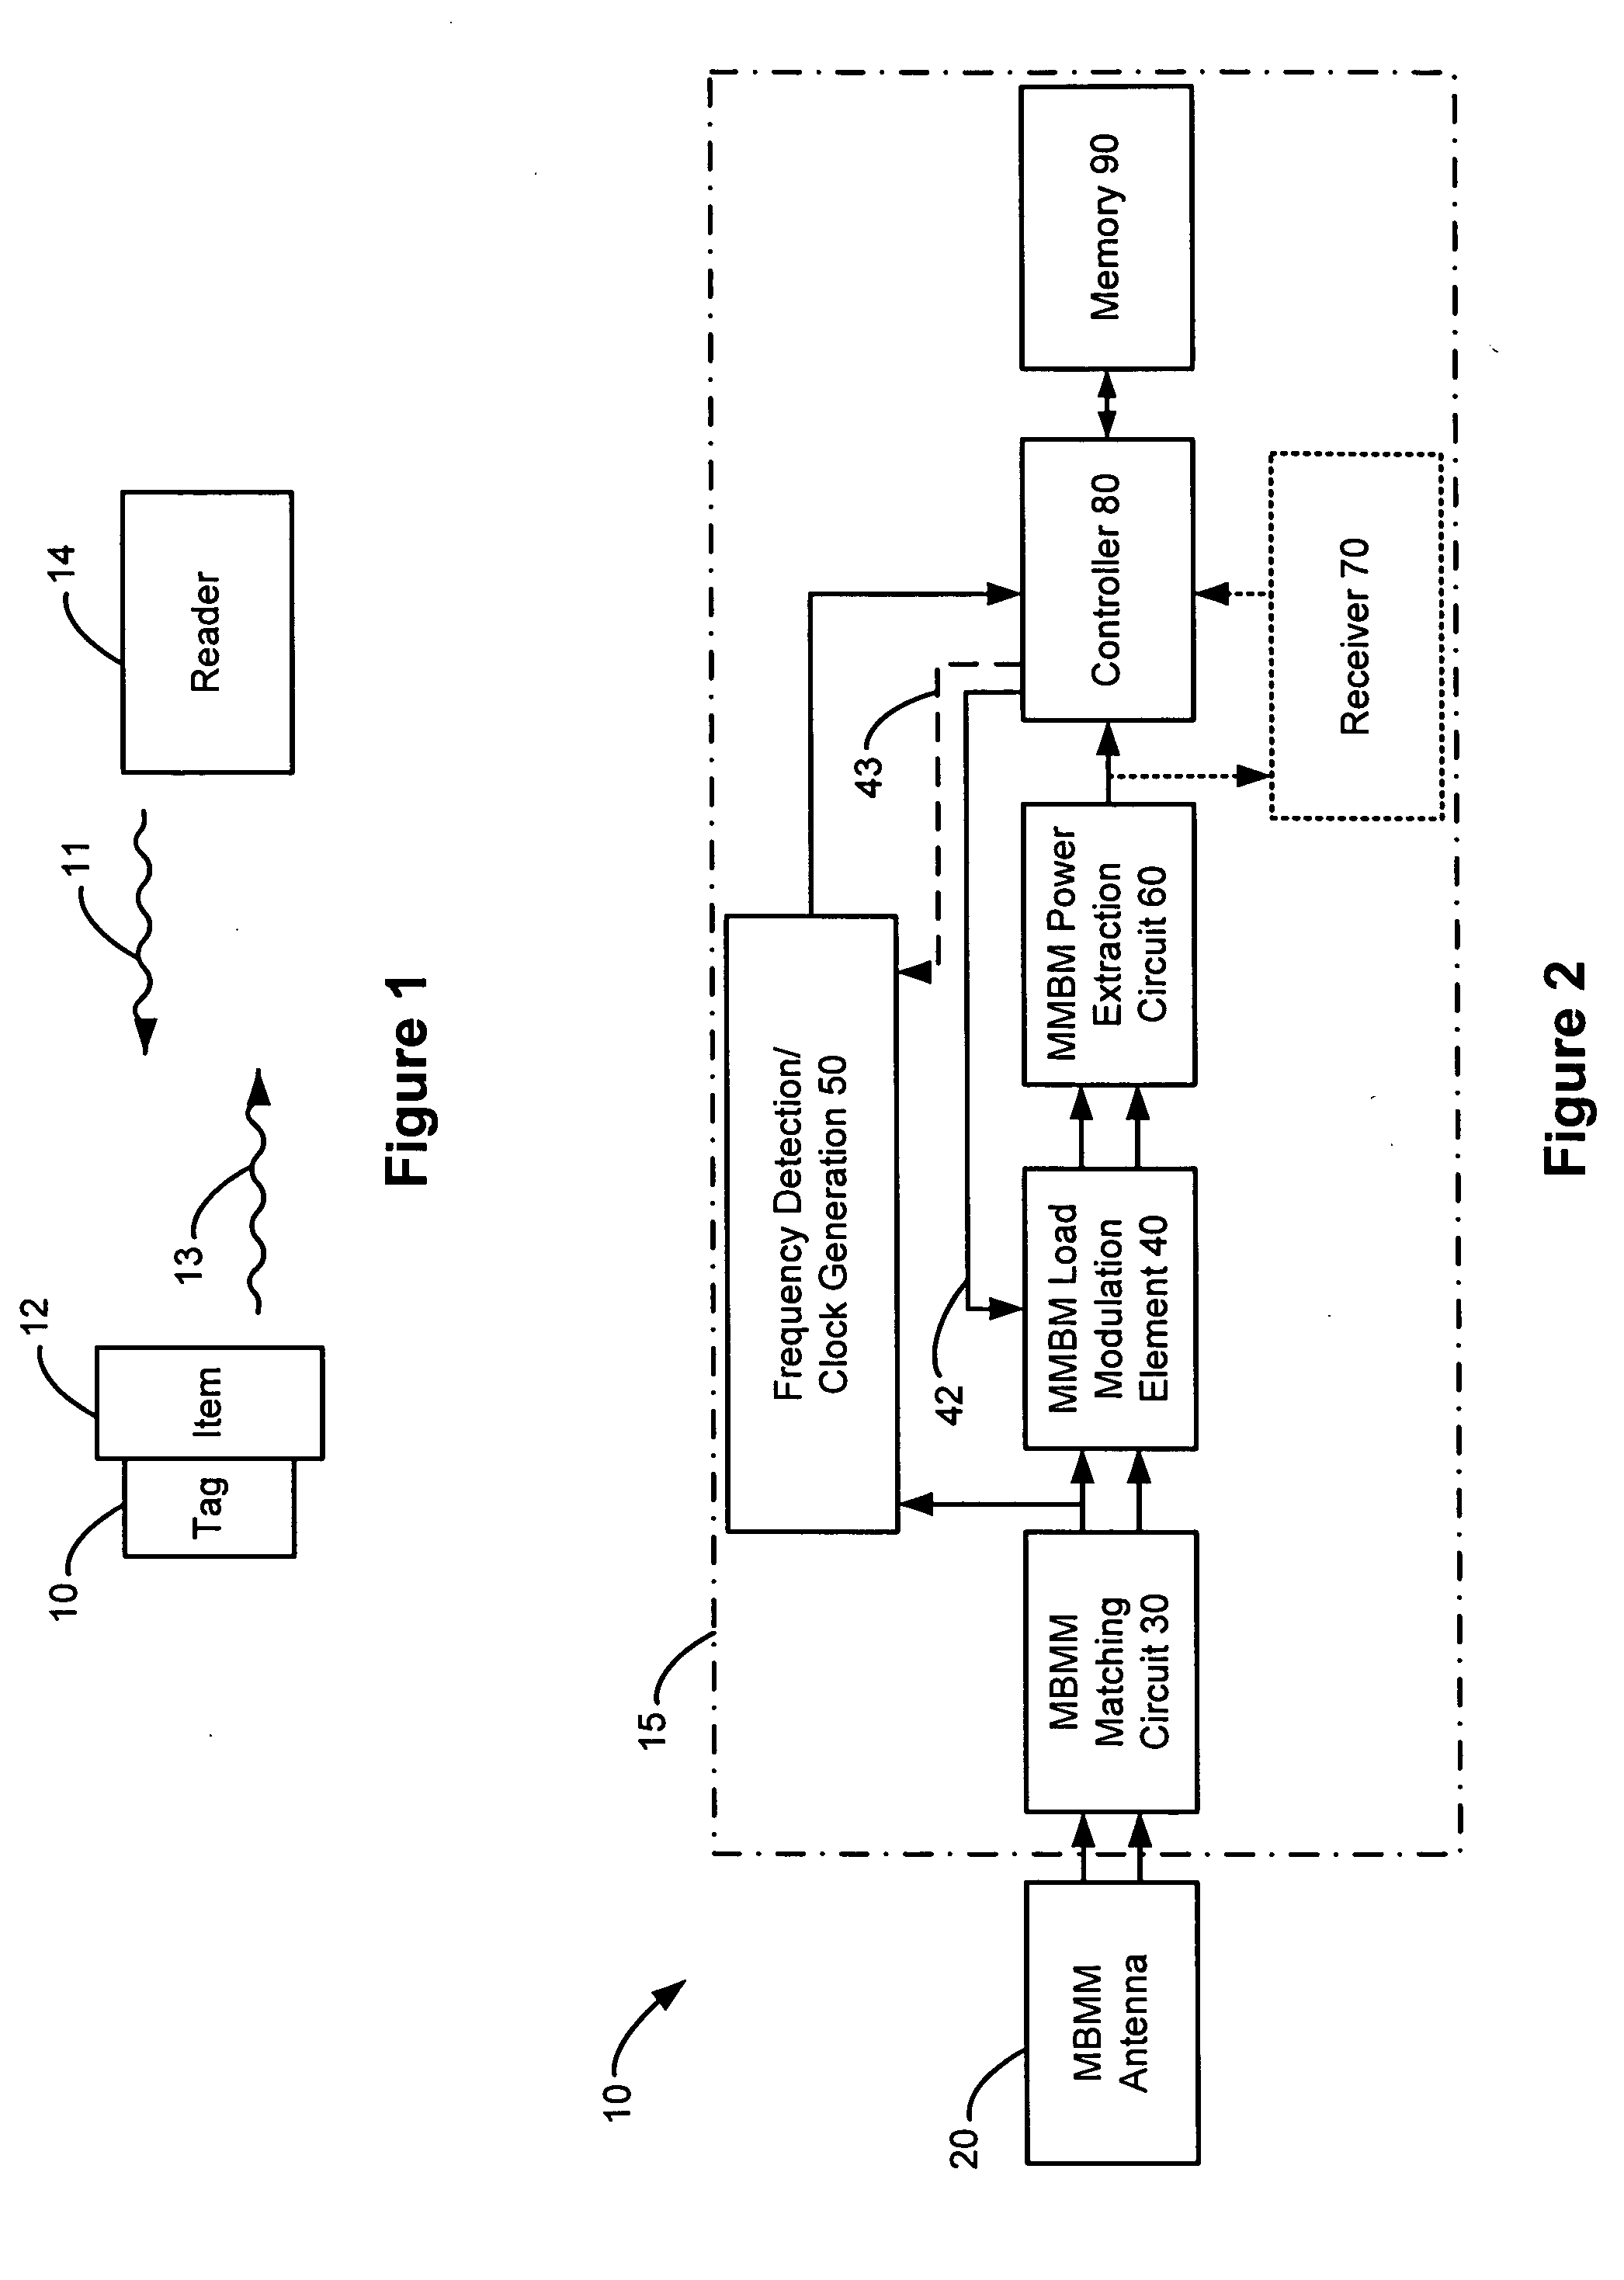 Method and apparatus for multiple frequency RFID tag architecture